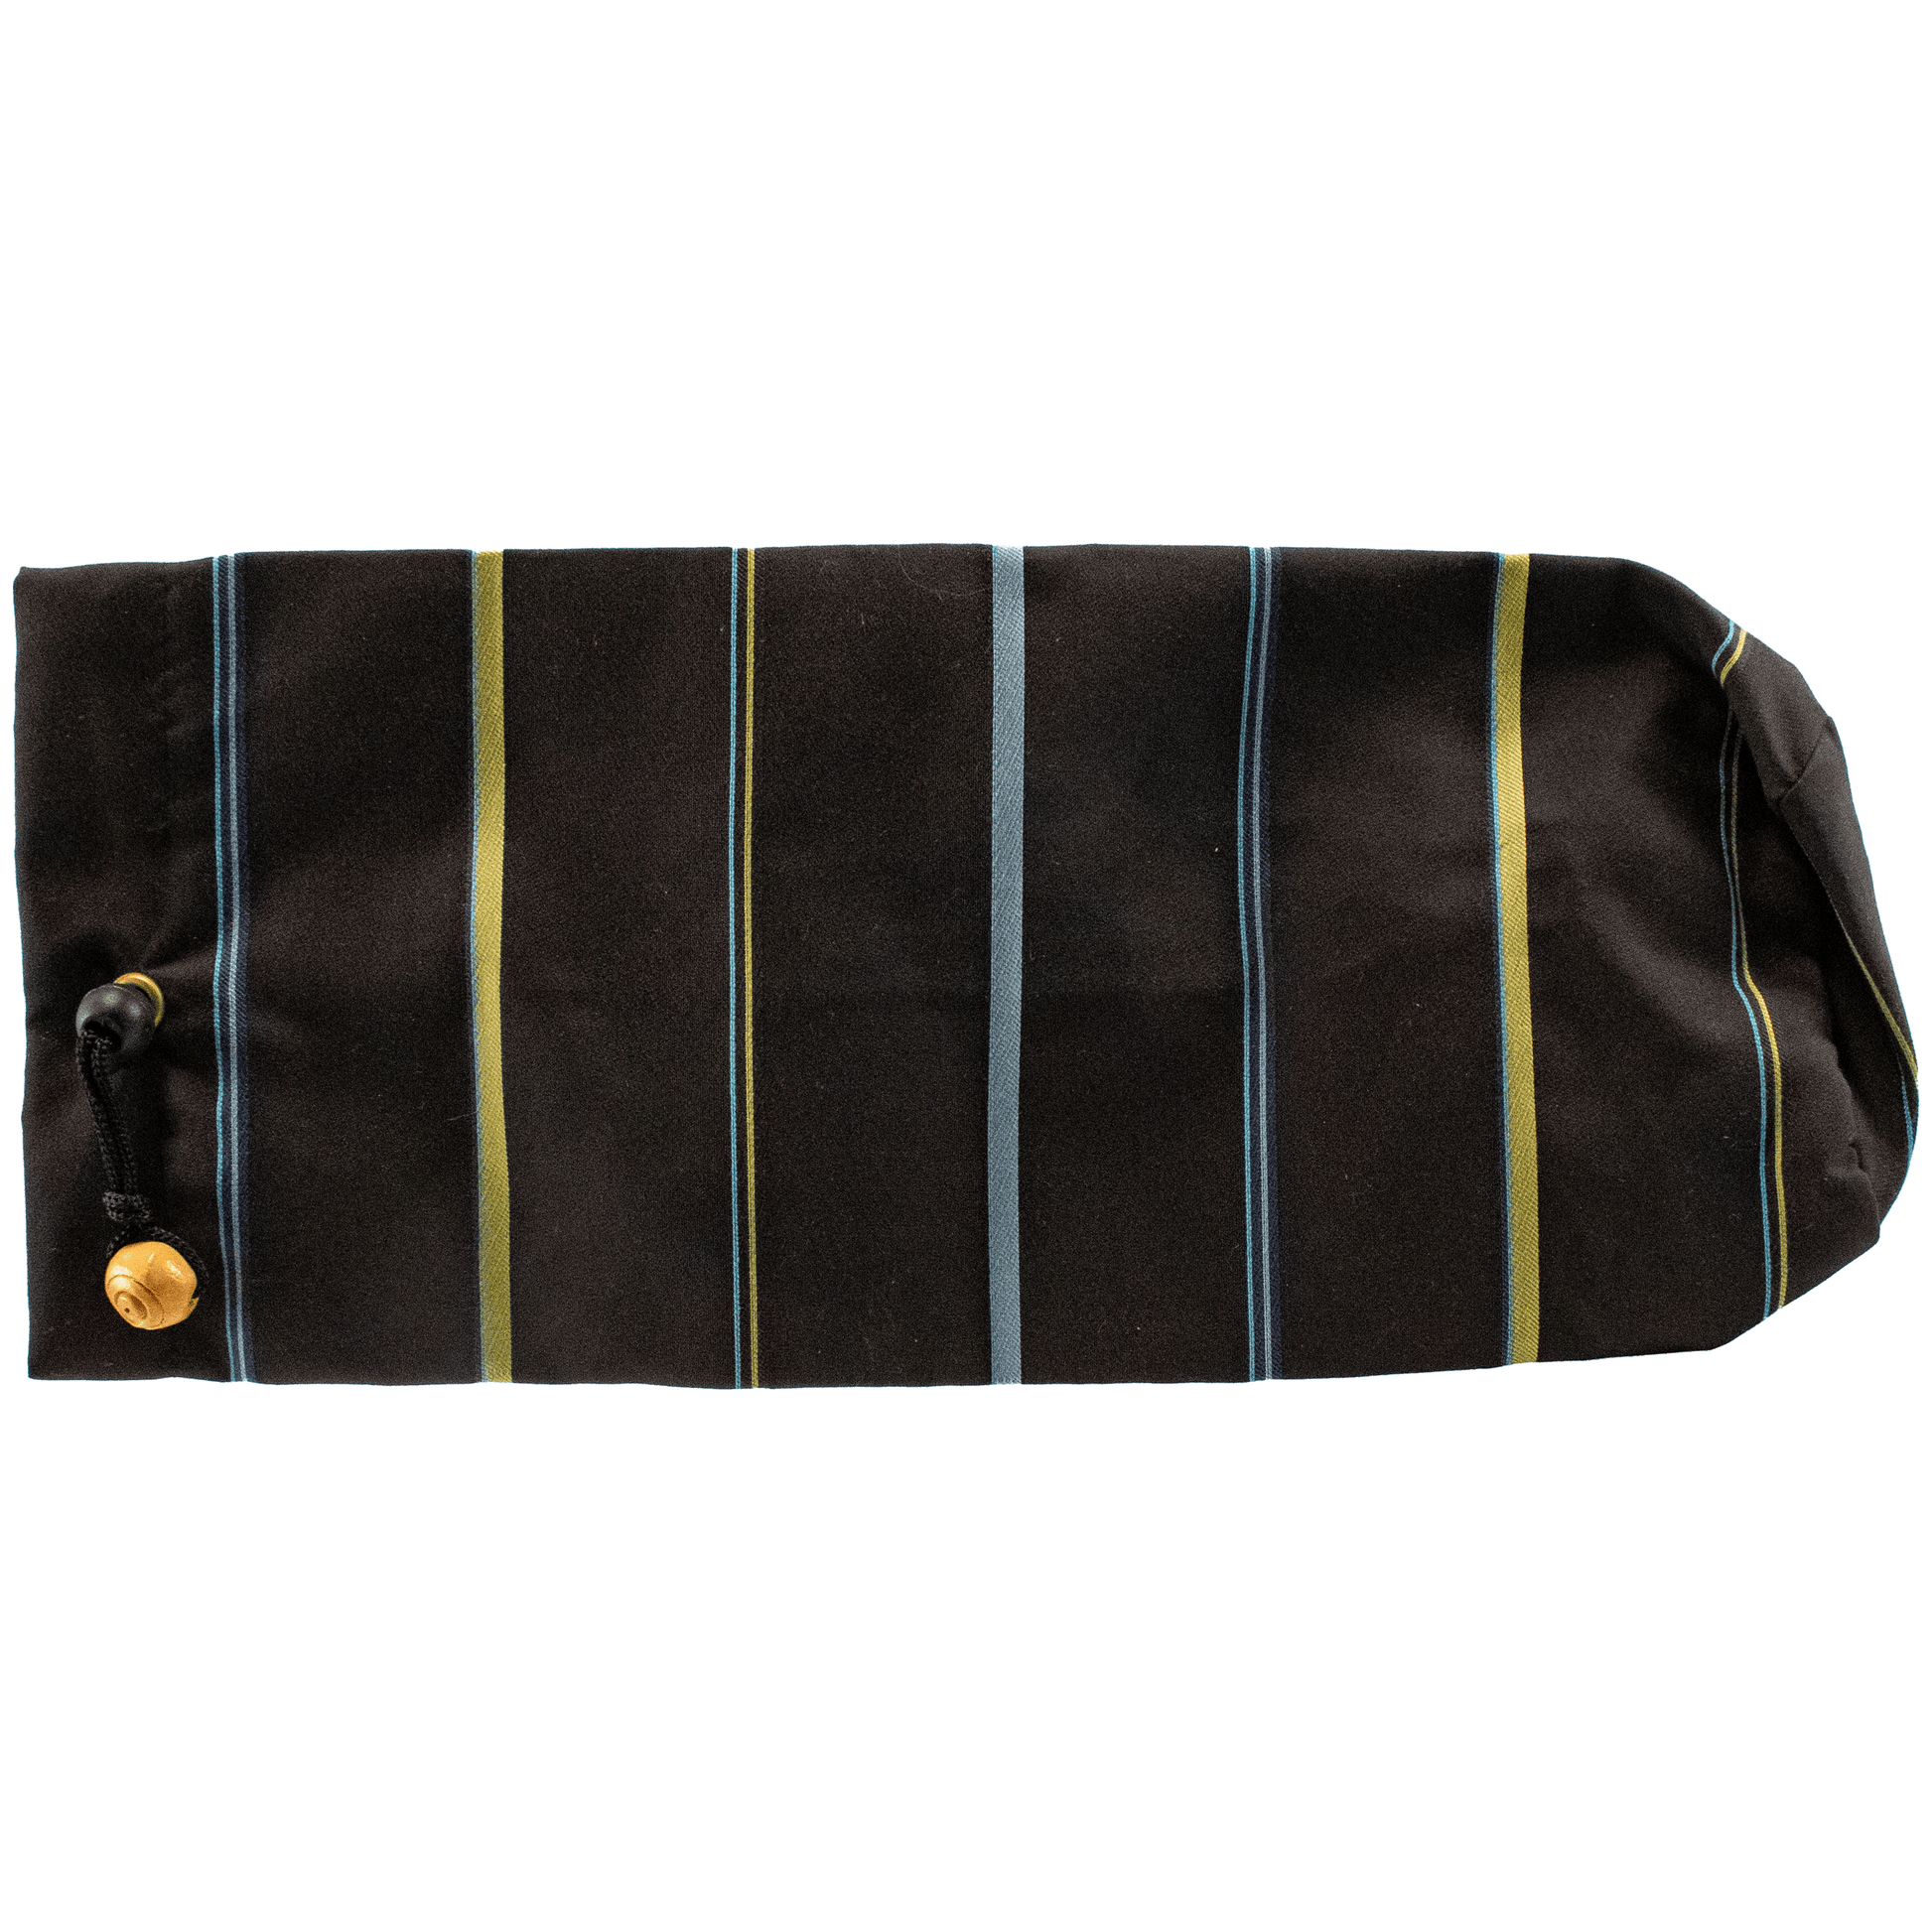 17 Inch Shofar Bag Black with blue and green stripes